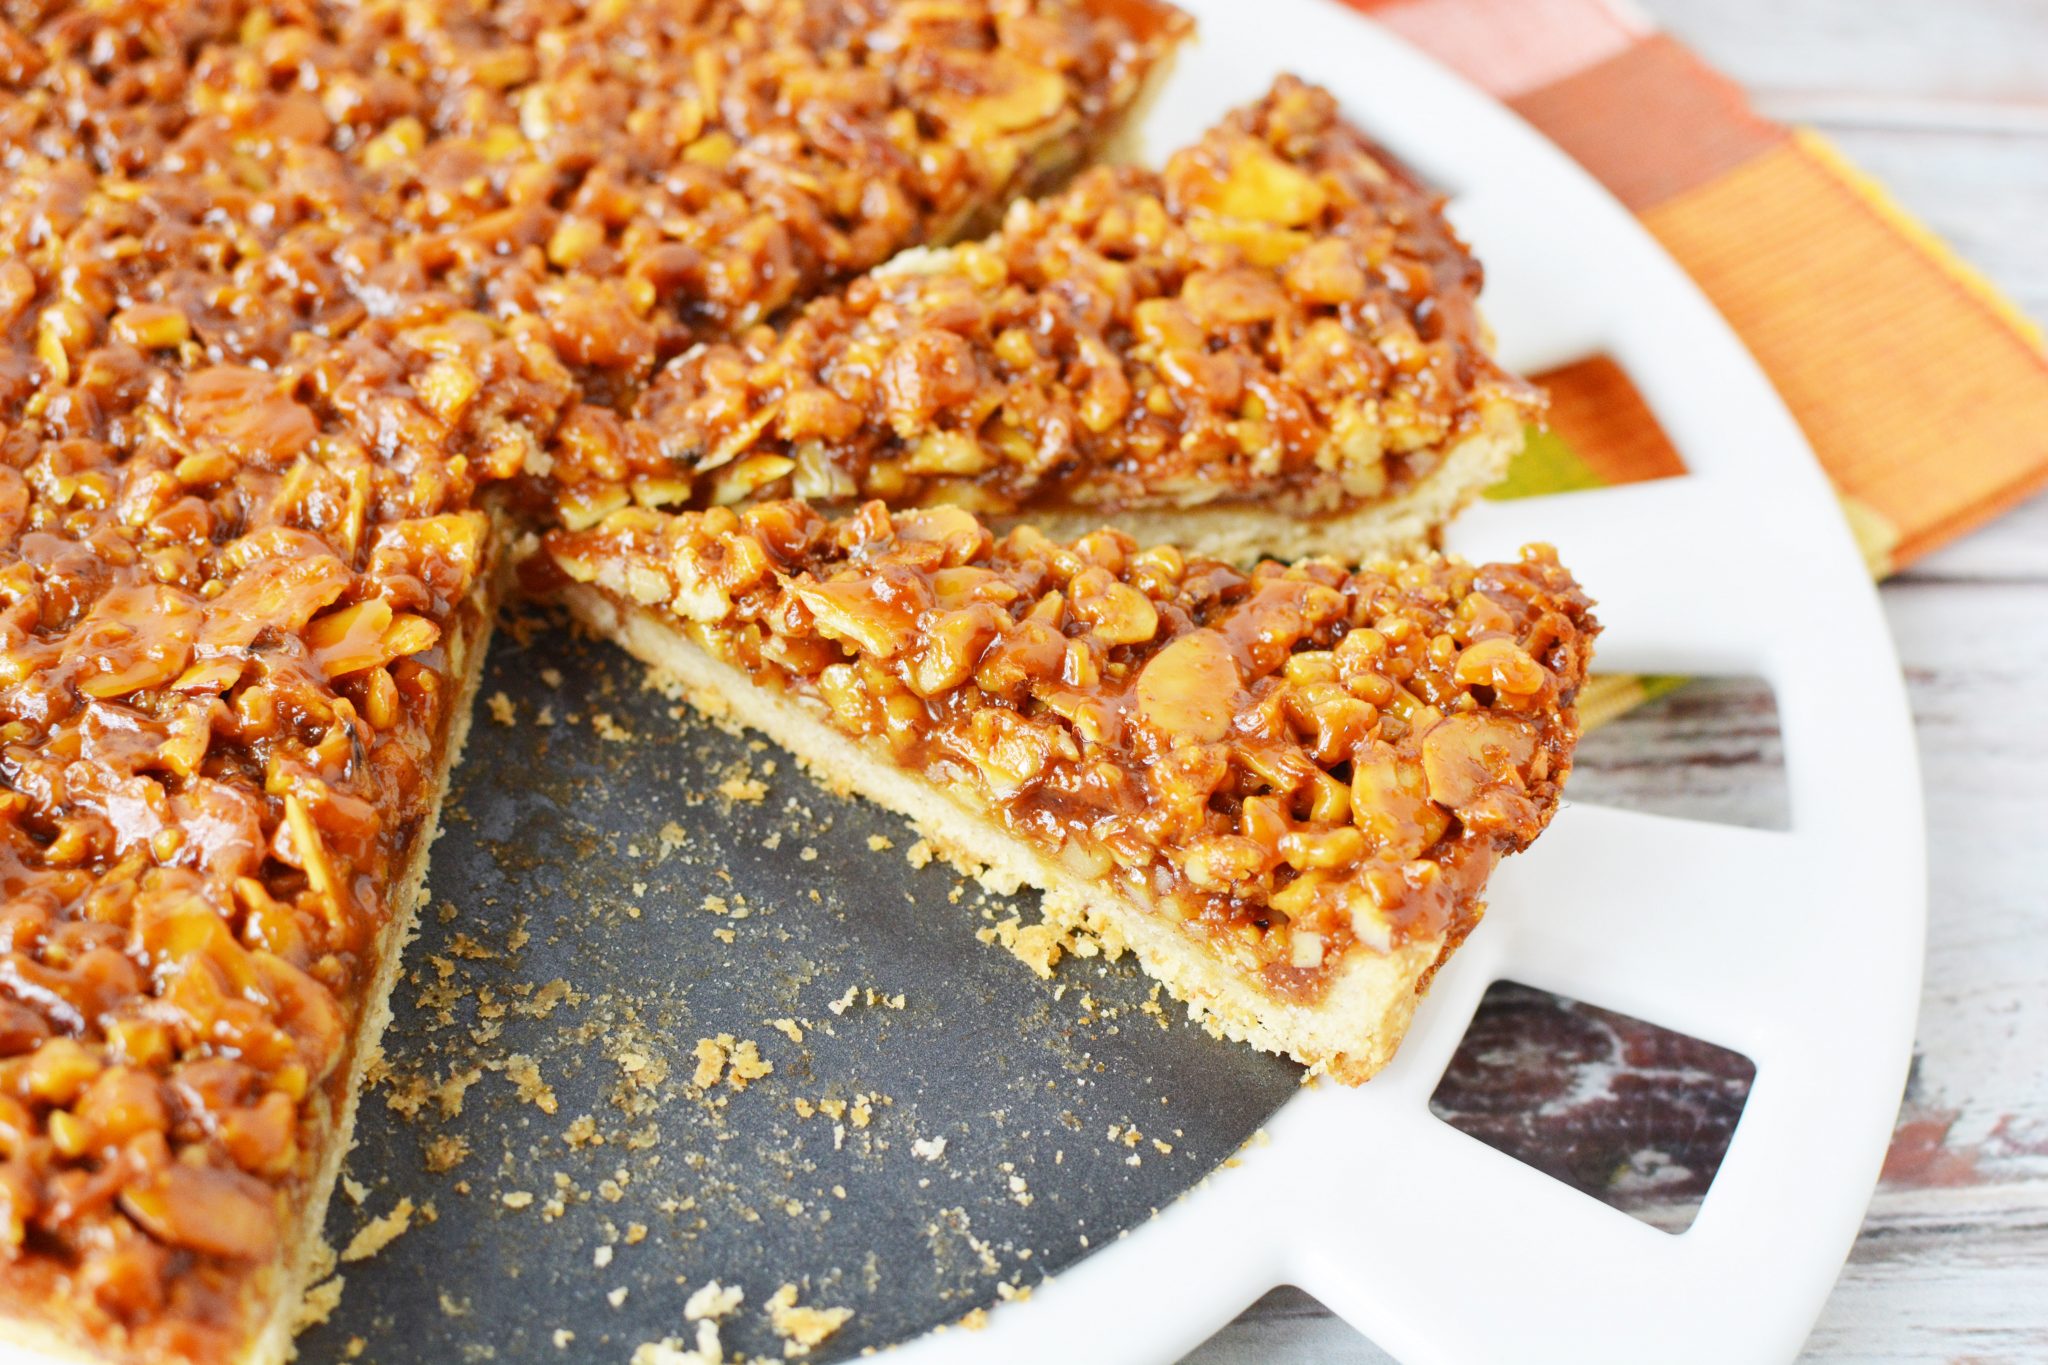 slices of tart covered in caramel and chopped nuts